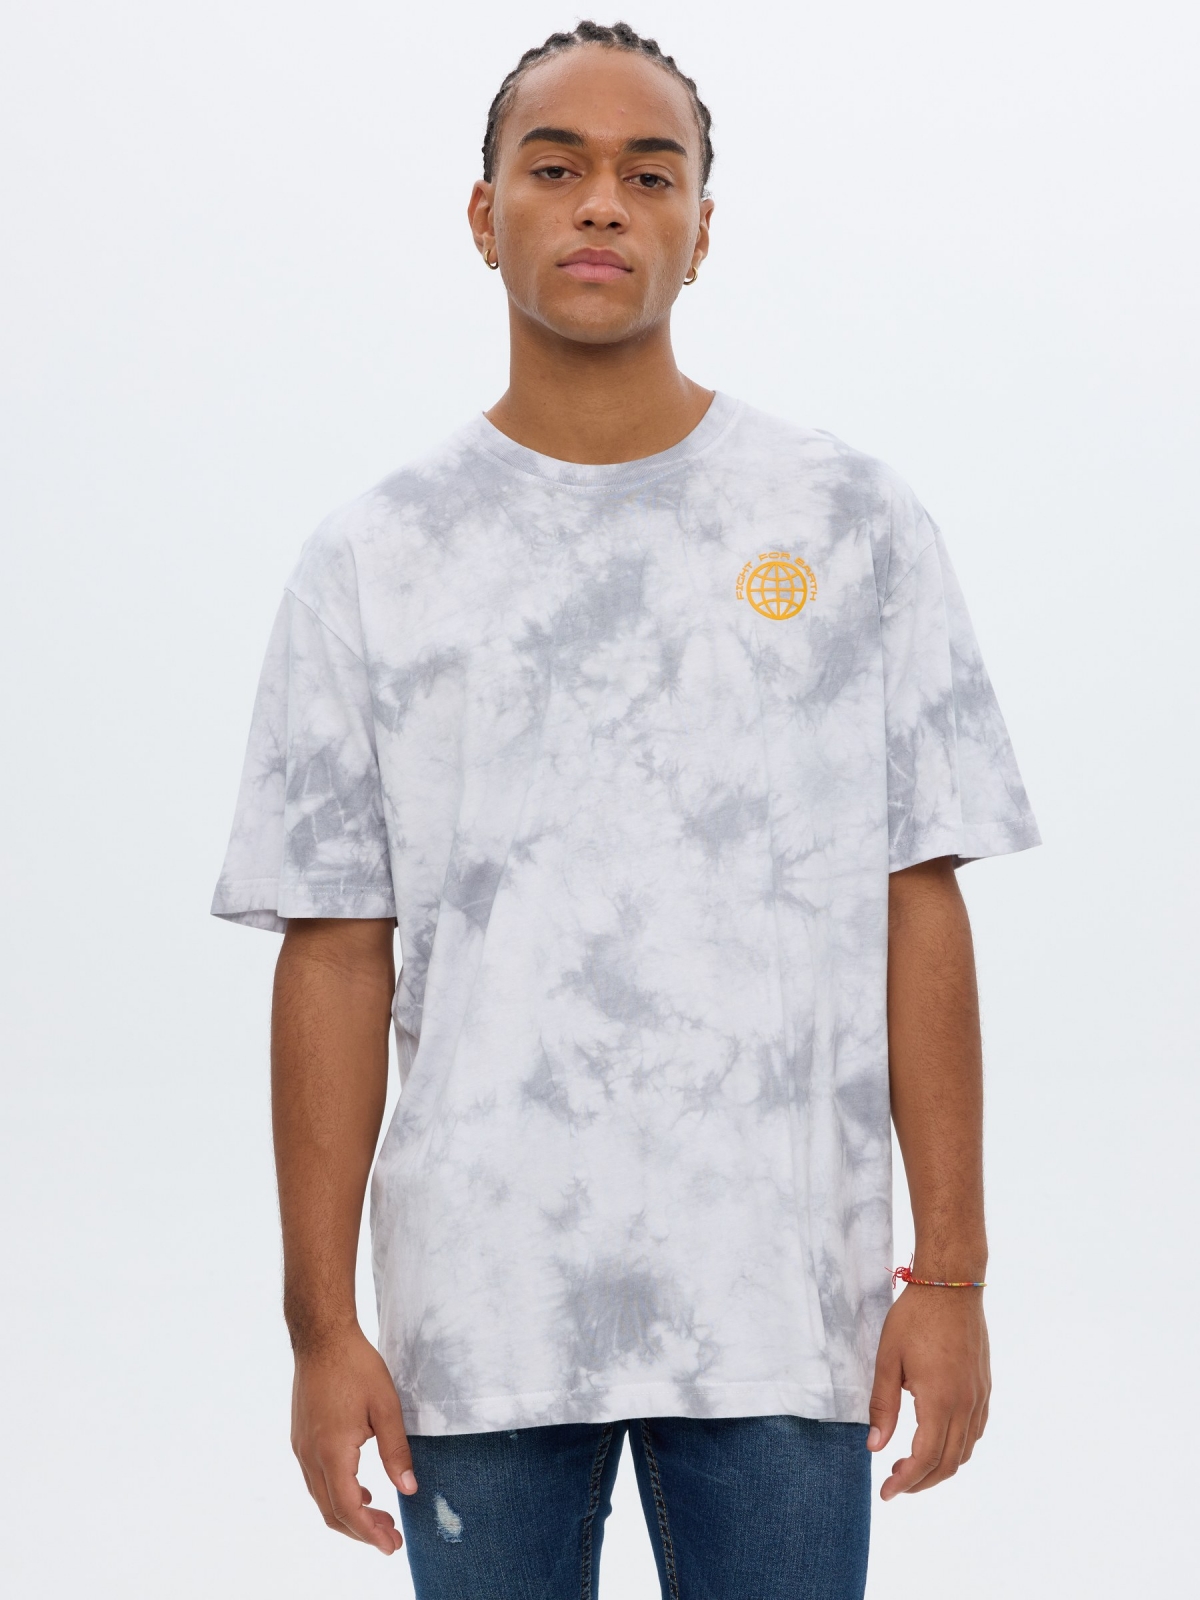 Tie&Dye T-shirt white middle front view